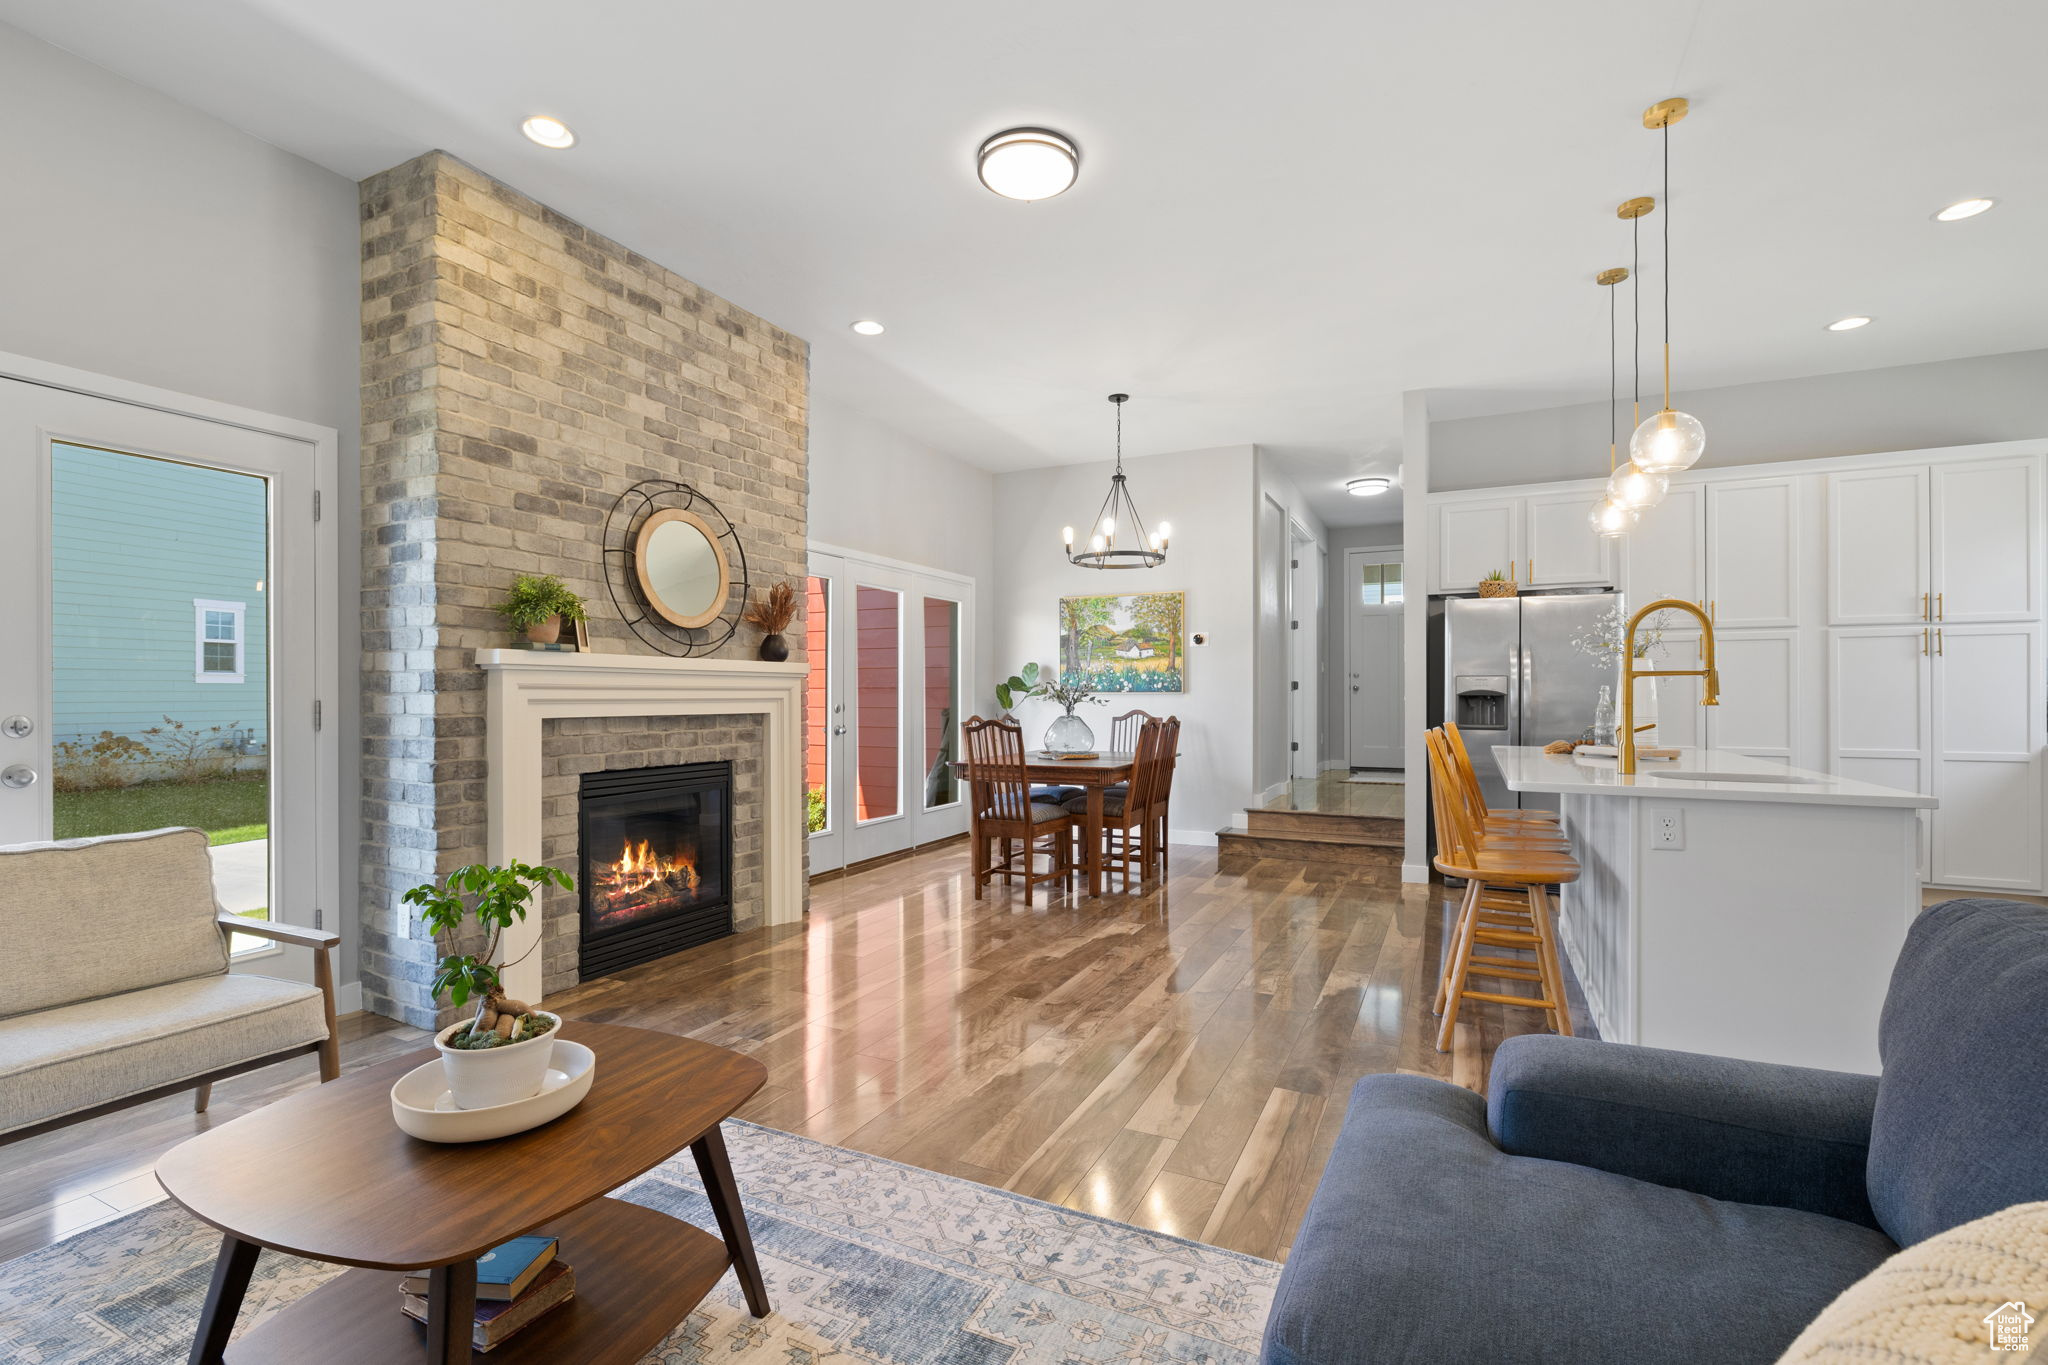 Living room featuring a brick fireplace, brick wall, sink, a notable chandelier, and light wood-type flooring